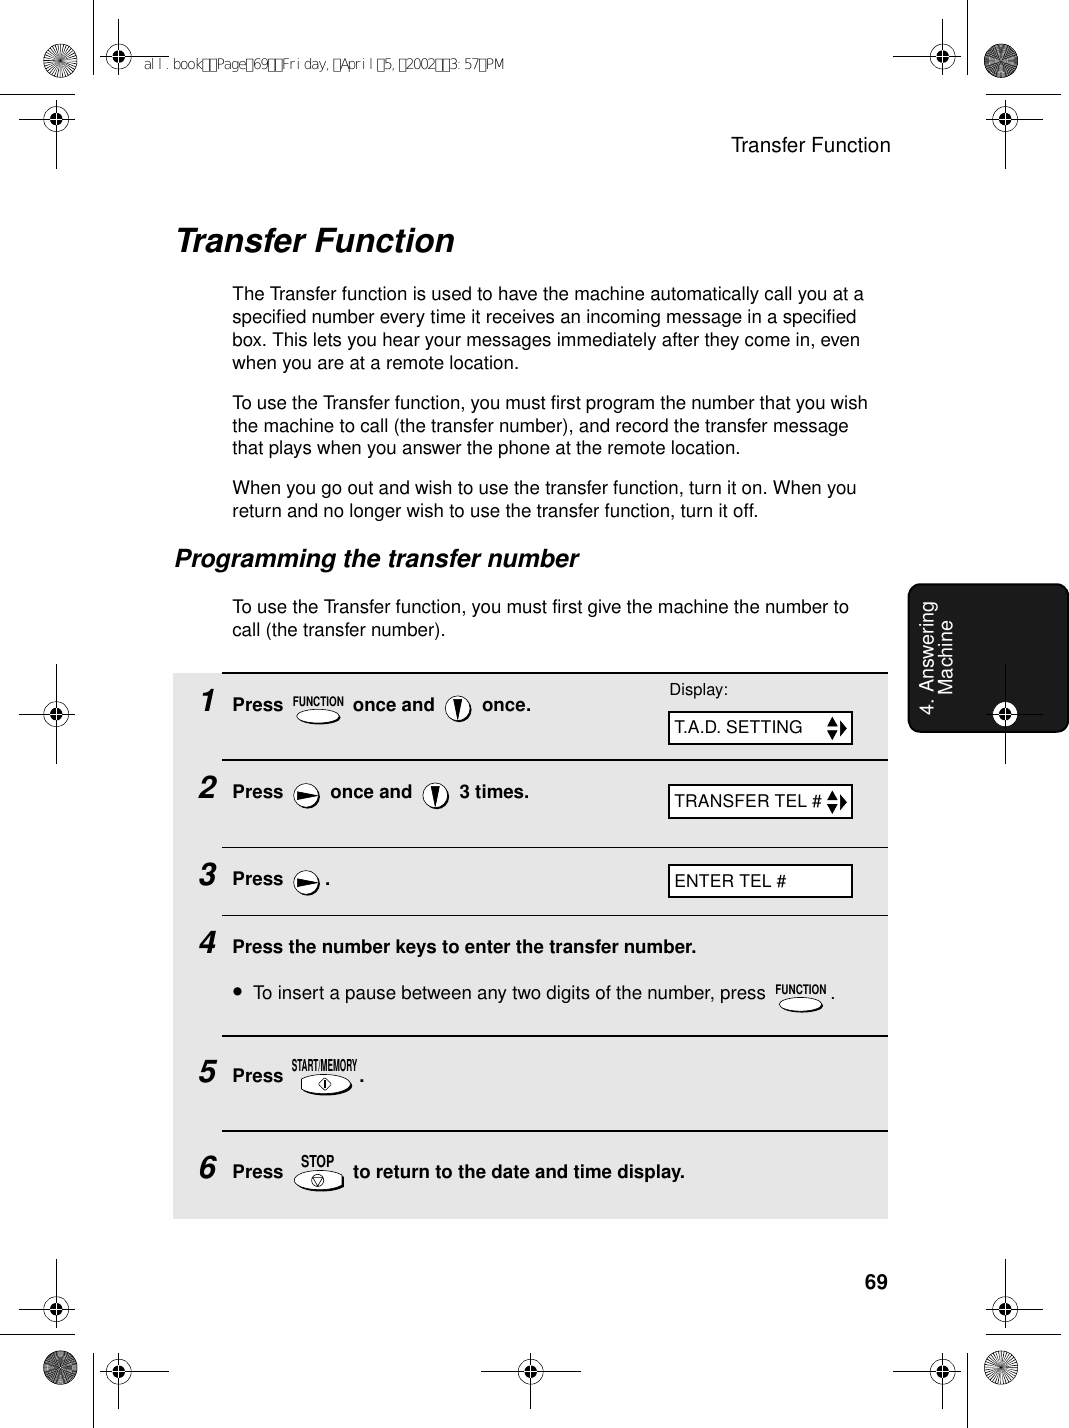 Transfer Function694. Answering MachineTransfer FunctionThe Transfer function is used to have the machine automatically call you at a specified number every time it receives an incoming message in a specified box. This lets you hear your messages immediately after they come in, even when you are at a remote location.To use the Transfer function, you must first program the number that you wish the machine to call (the transfer number), and record the transfer message that plays when you answer the phone at the remote location.When you go out and wish to use the transfer function, turn it on. When you return and no longer wish to use the transfer function, turn it off.Programming the transfer numberTo use the Transfer function, you must first give the machine the number to call (the transfer number). 1Press   once and   once.2Press   once and   3 times.3Press .4Press the number keys to enter the transfer number.•To insert a pause between any two digits of the number, press  .5Press .6Press   to return to the date and time display.FUNCTIONFUNCTIONSTART/MEMORYSTOPTRANSFER TEL #Display:T.A.D. SETTINGENTER TEL #all.bookPage69Friday,April5,20023:57PM